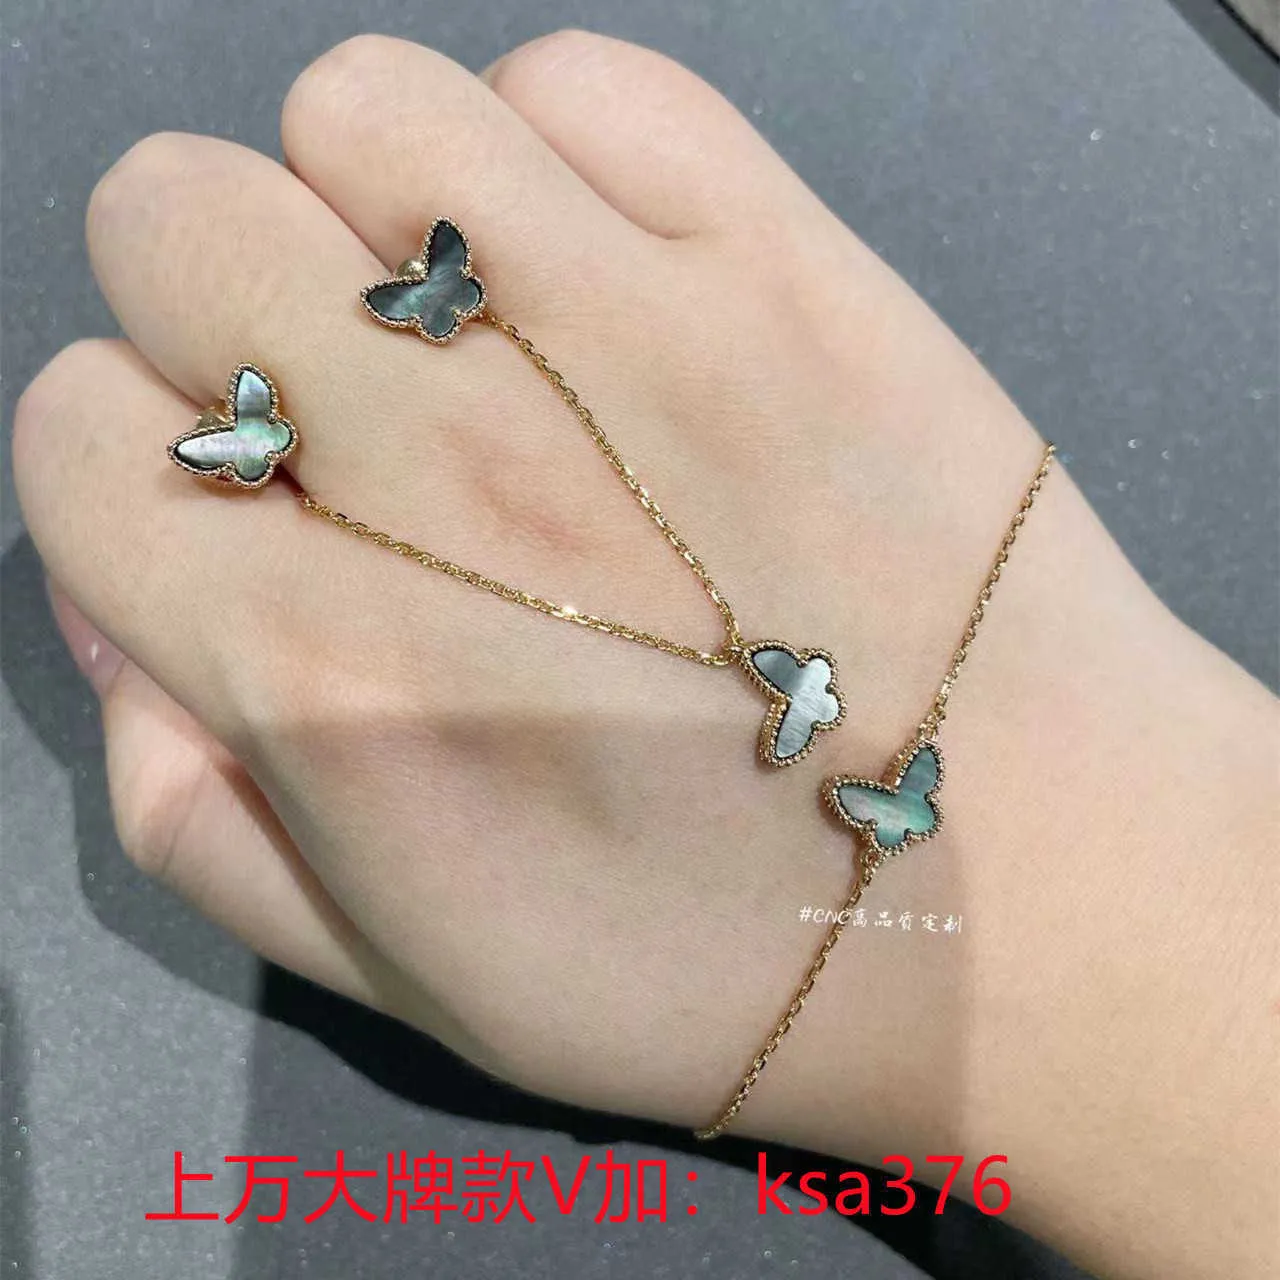 Designer Necklace VanCF Necklace Luxury Diamond Agate 18k Gold Sterling Grey Butterfly Necklace Plated with Rose Gold Mini Grey Butterfly Bracelet Earrings